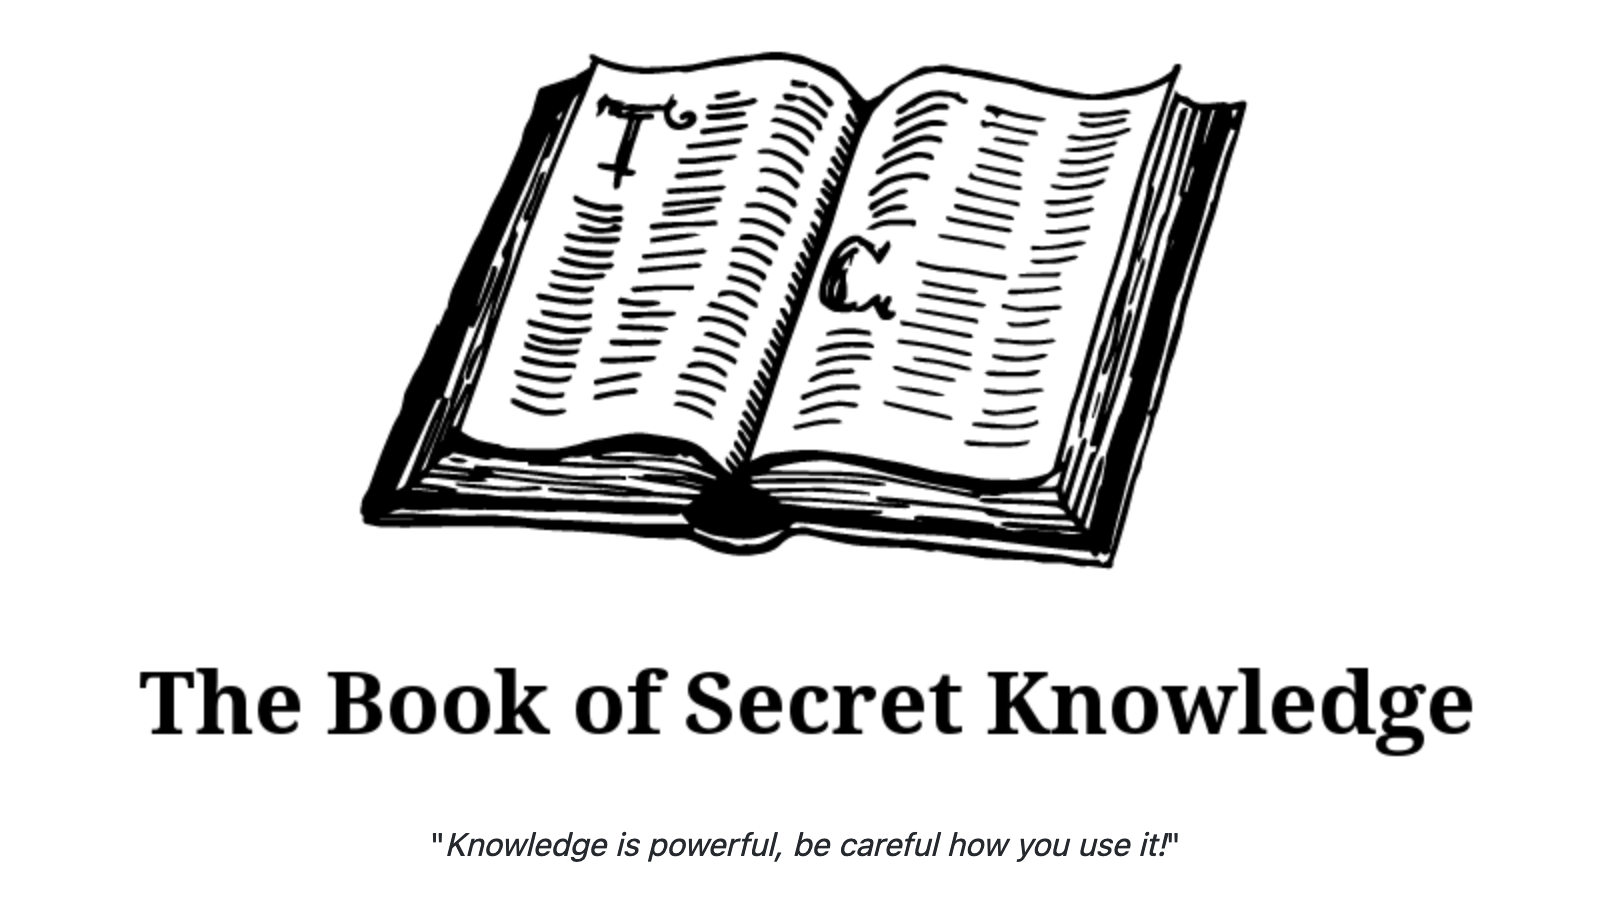 The book of Secret Knowledge – Knowledge is powerful, be careful how you use it.